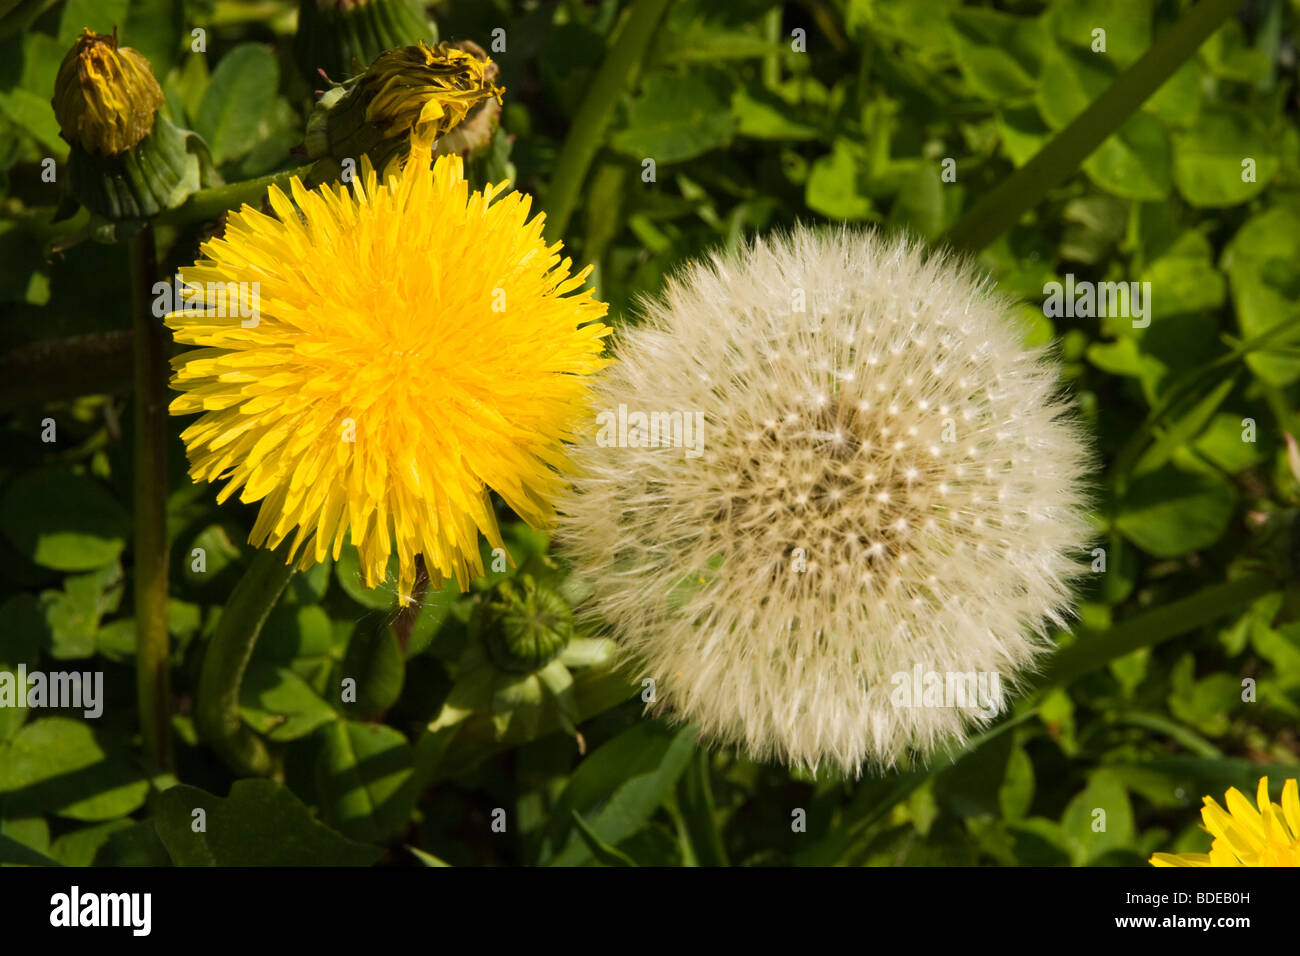 Taraxacum officinale, commonly called Dandelion, is a herbaceous perennial plant of the family Asteraceae (Compositae). Stock Photo